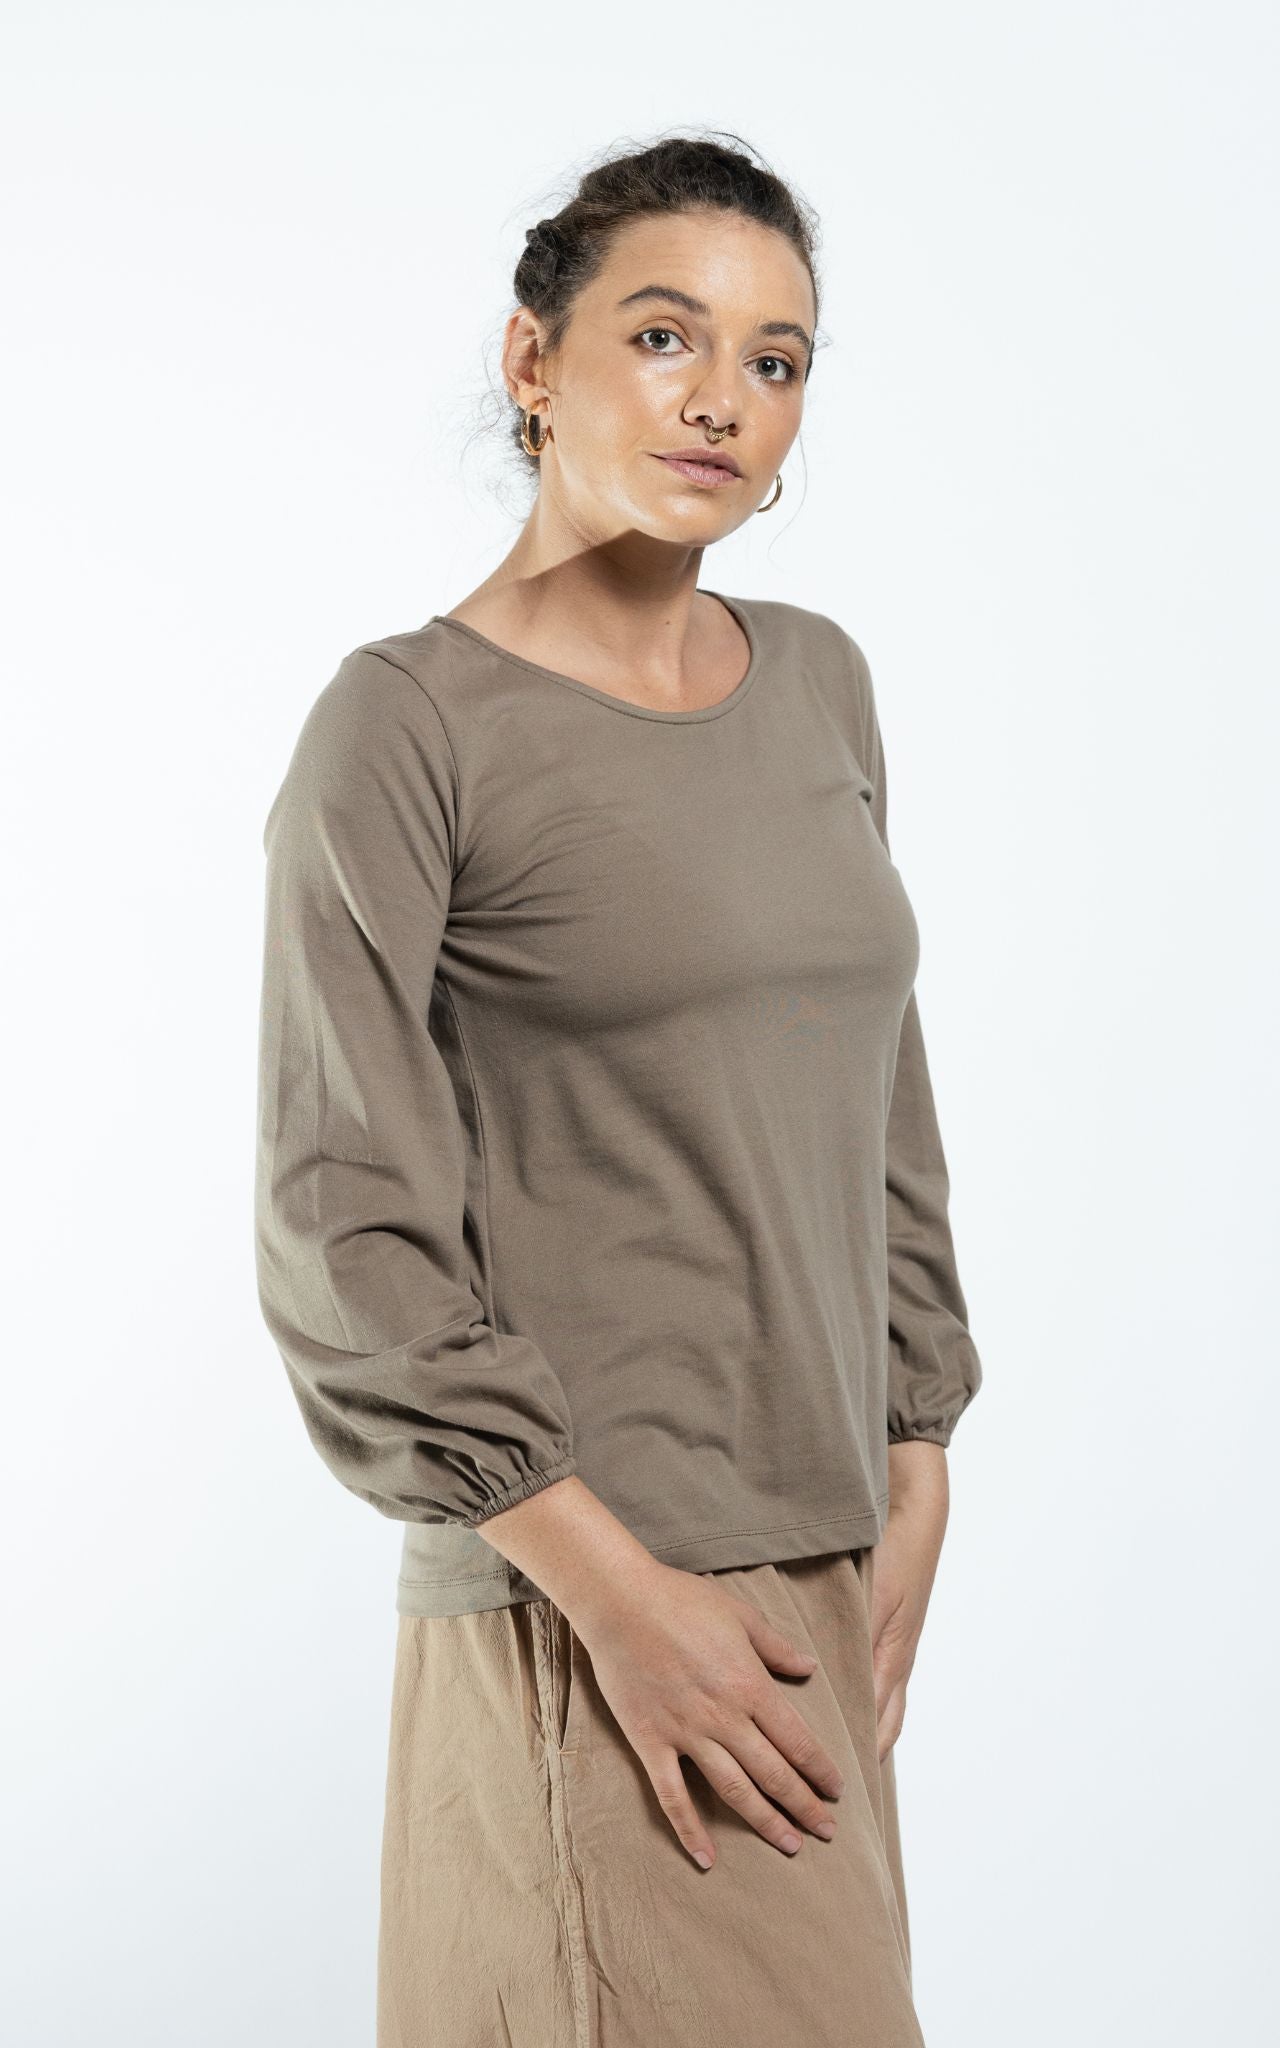 Surya The Label Ethical Organic Cotton 'Zoé' Top made in Nepal - Sage